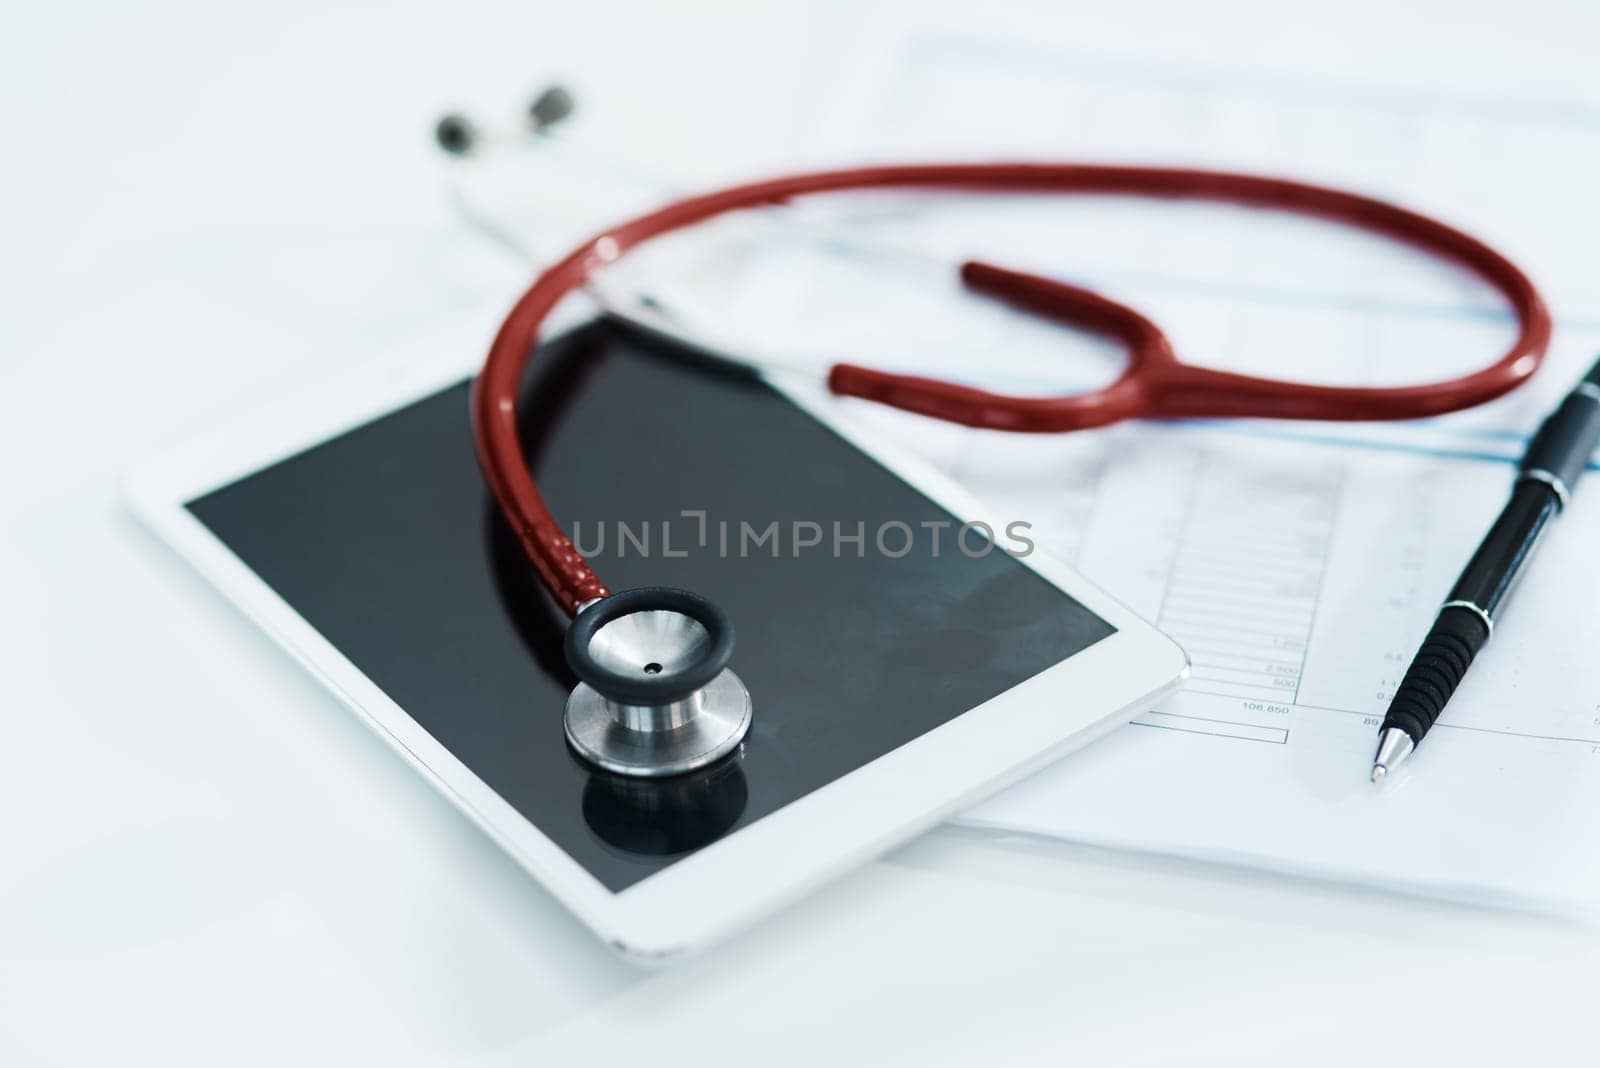 Hospital, documents and tablet with stethoscope on desk for medical website, telehealth and research. Healthcare, cardiology and digital tech, equipment and clipboard for online consulting service.